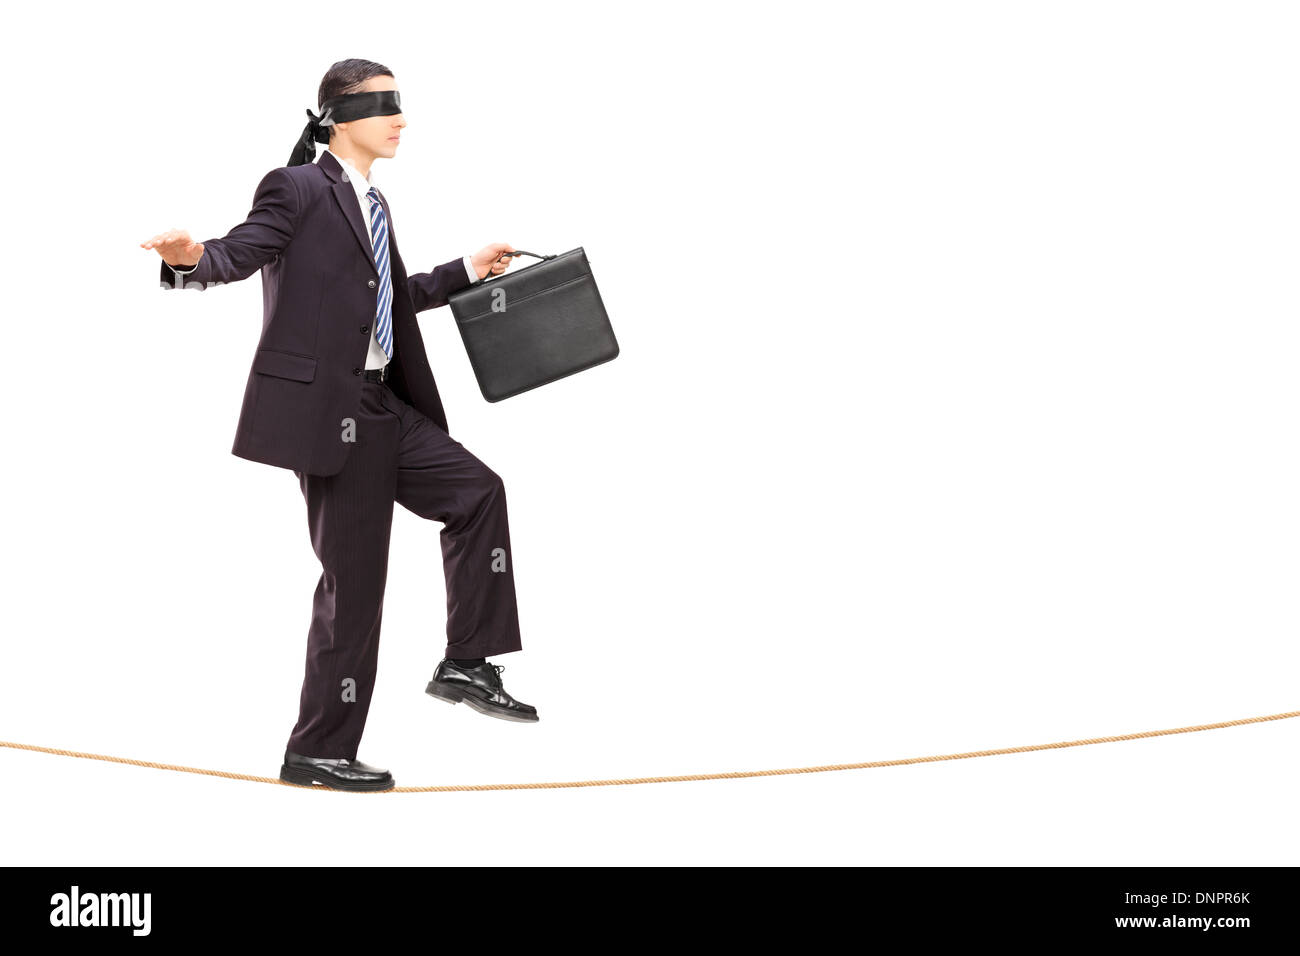 Premium Vector  Closeup profile of blindfolded man in suit. motivated  person going to risk concept